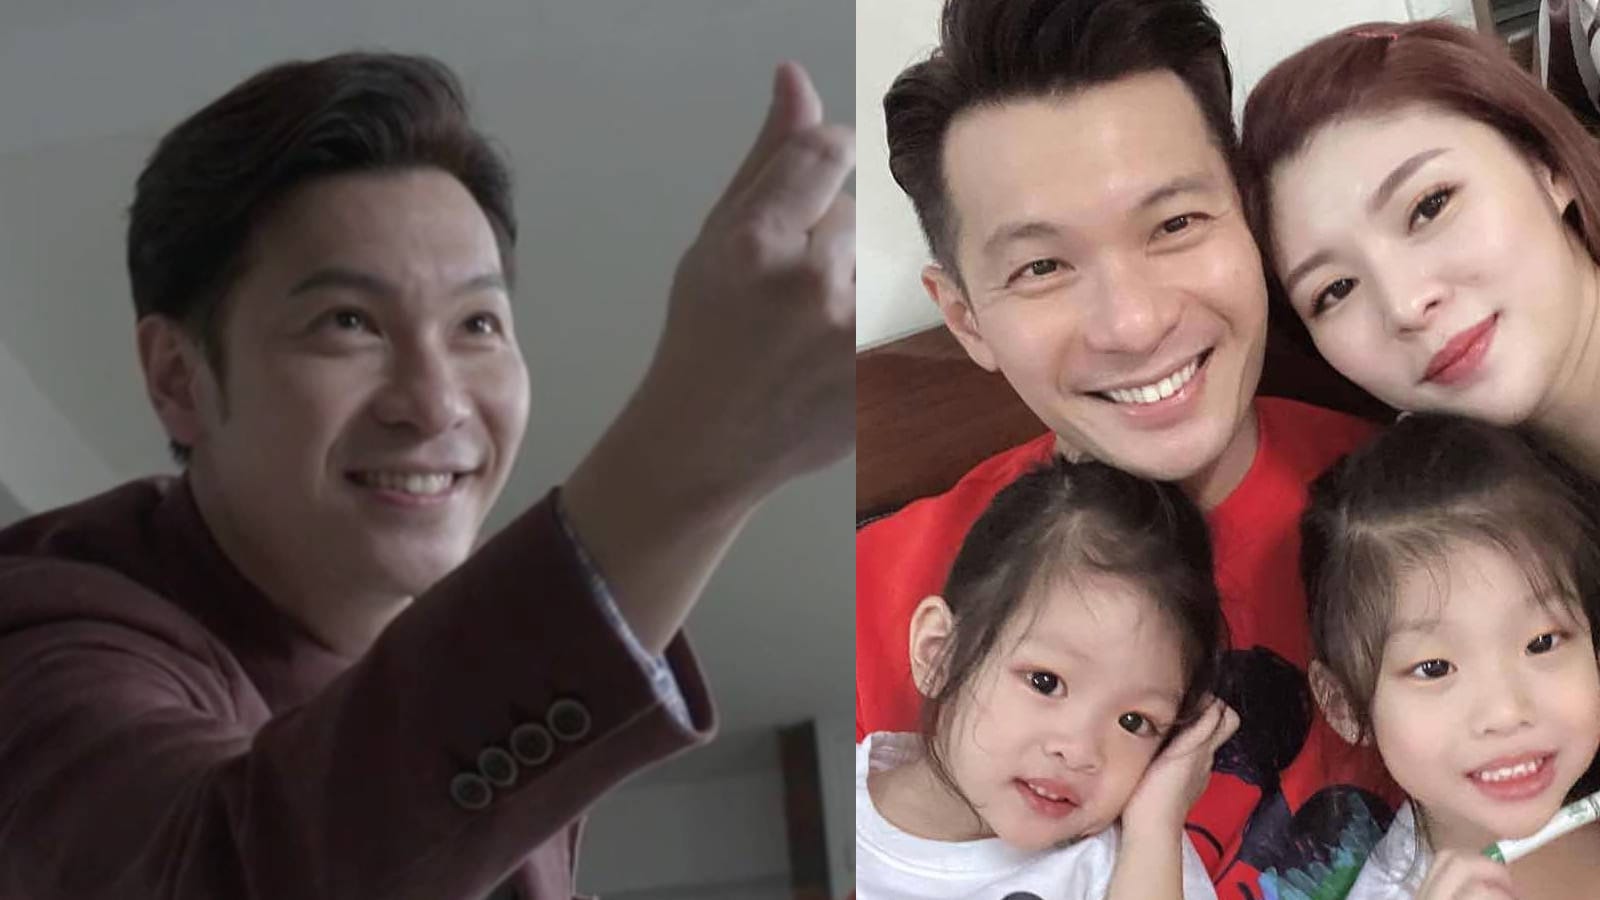 Shaun Chen’s Kids “Laughed" At Him After Seeing Him Practice His Dance Moves For Leave No Soul Behind